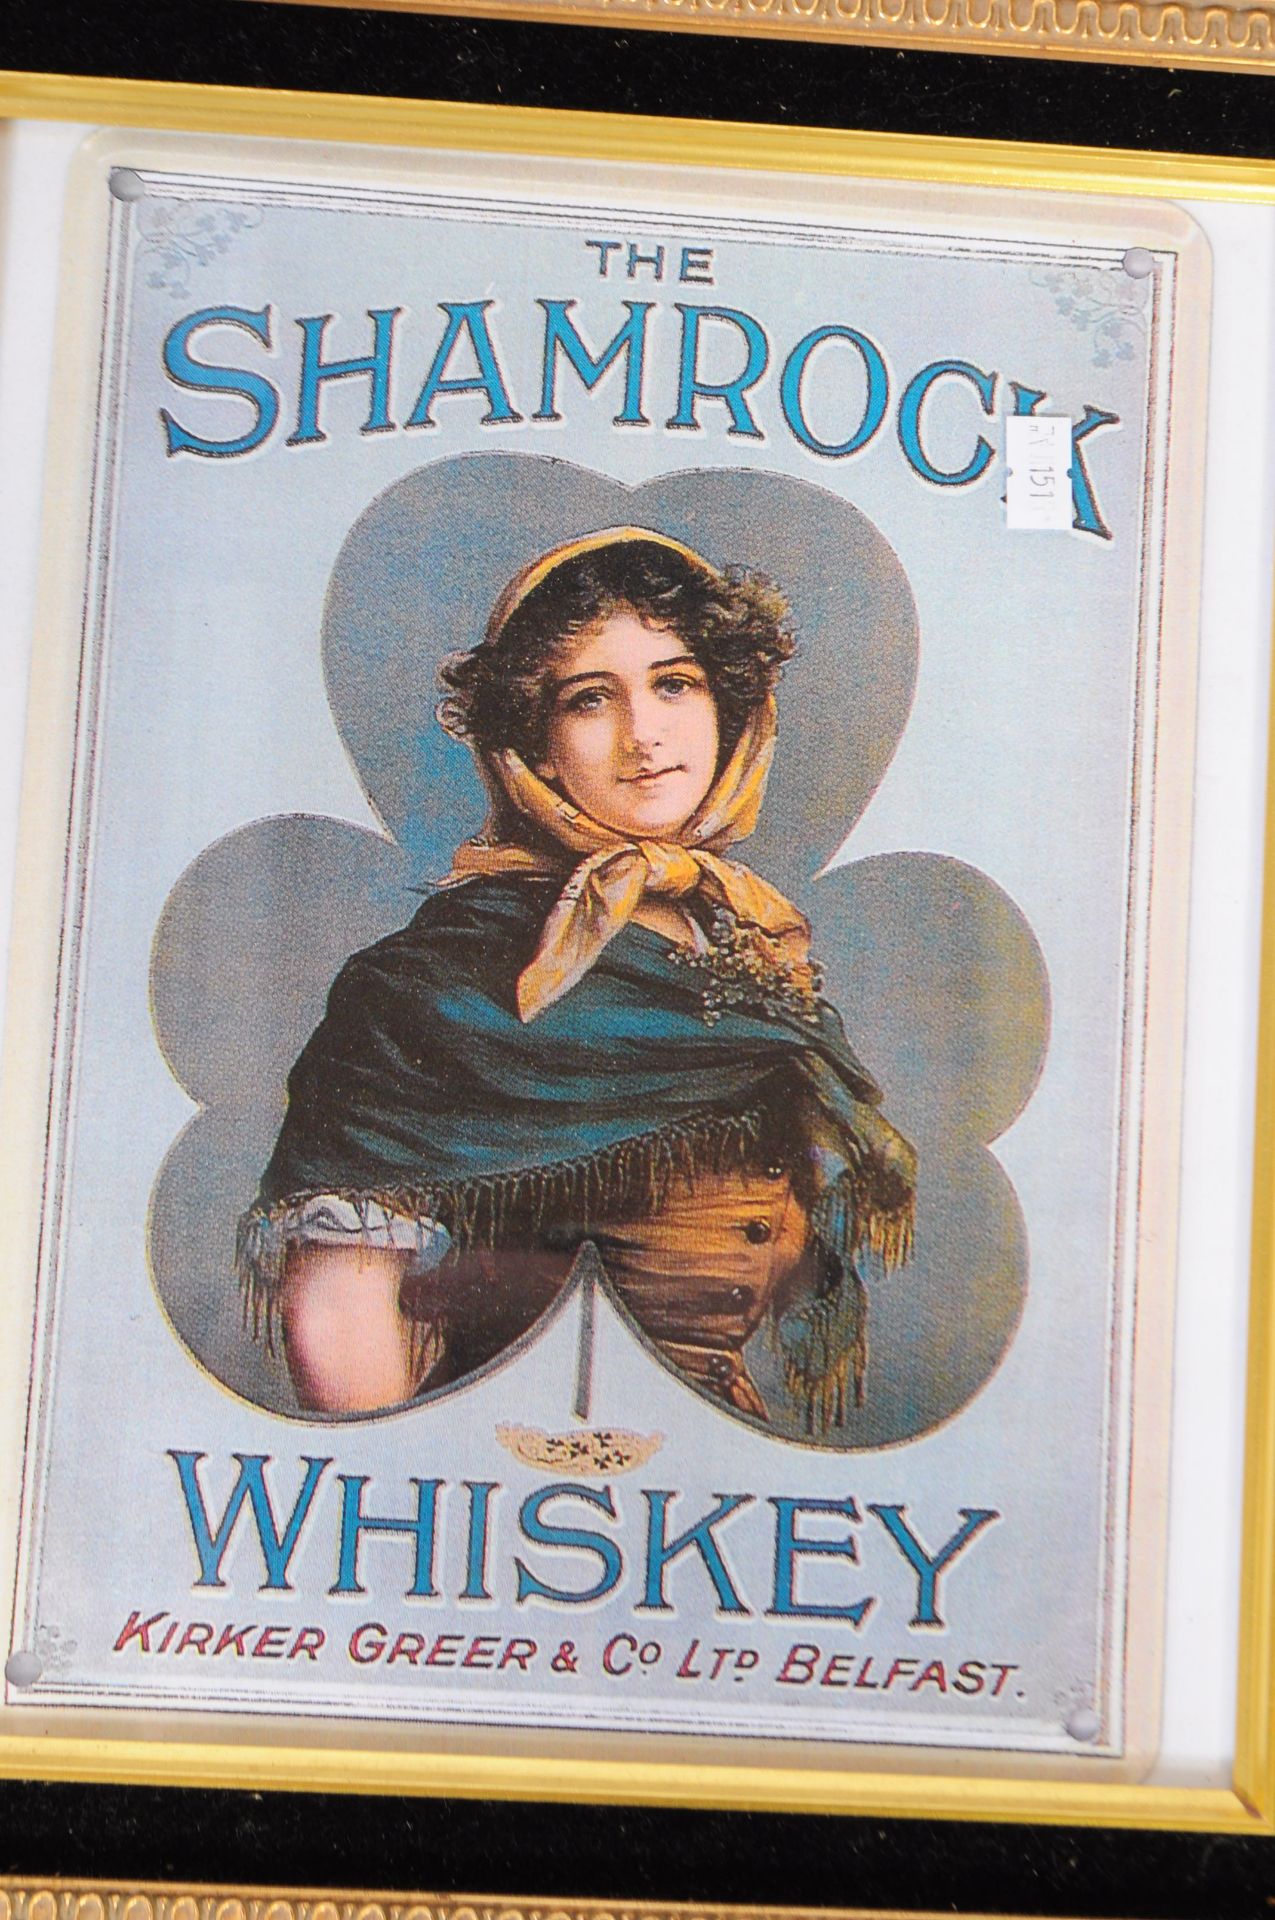 BREWERIANA INTEREST - COLLECTION OF WHISKEY PRINTS - Image 6 of 7